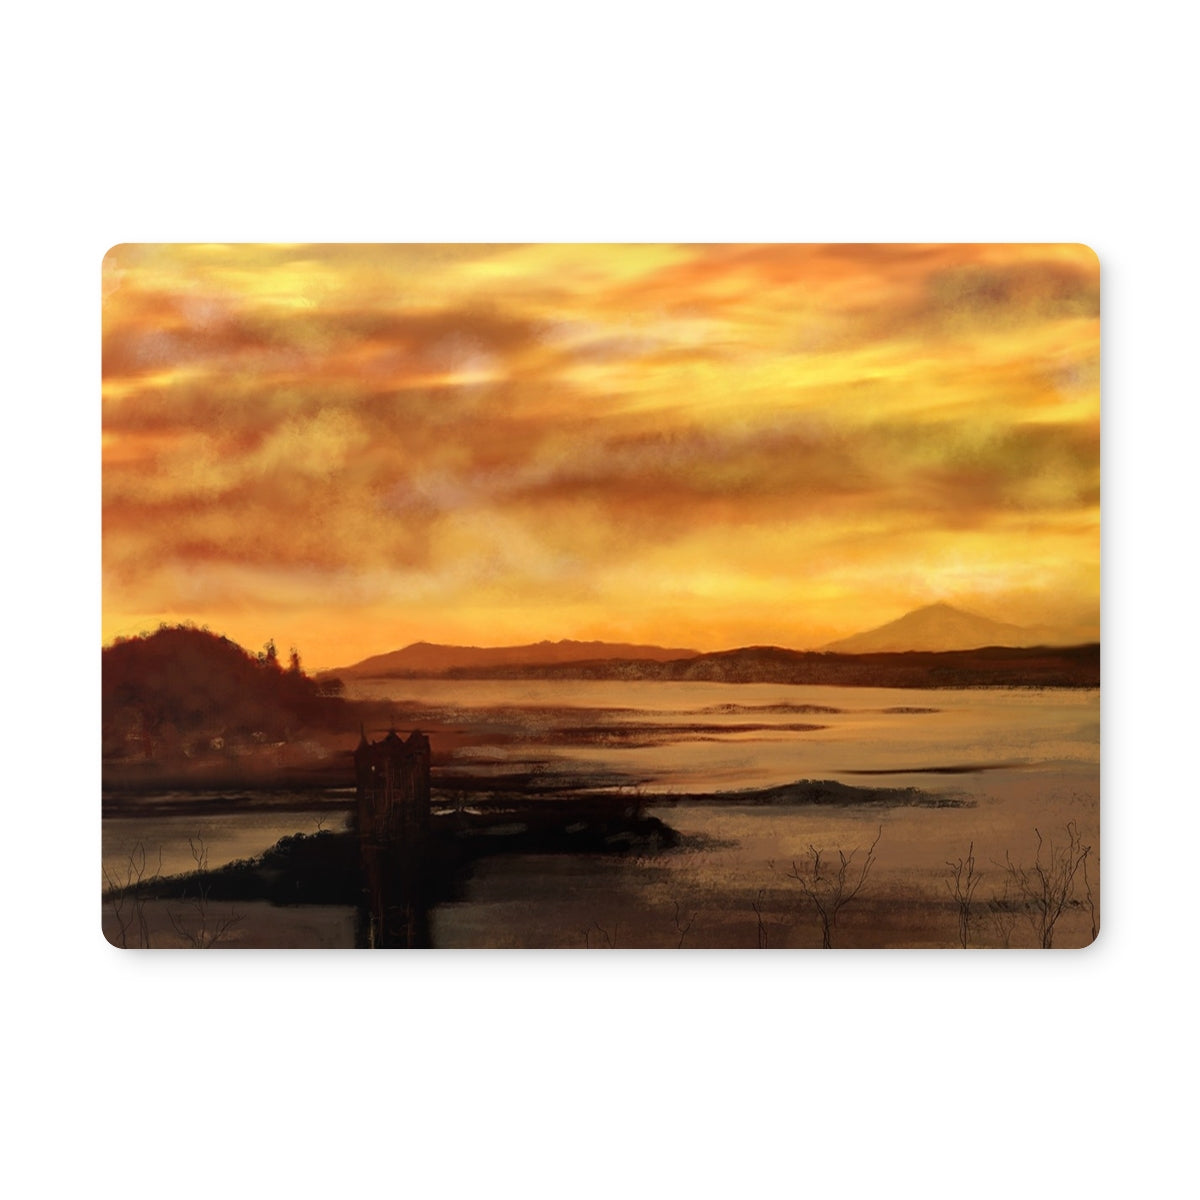 Castle Stalker Dusk Art Gifts Placemat-Placemats-Historic & Iconic Scotland Art Gallery-6 Placemats-Paintings, Prints, Homeware, Art Gifts From Scotland By Scottish Artist Kevin Hunter